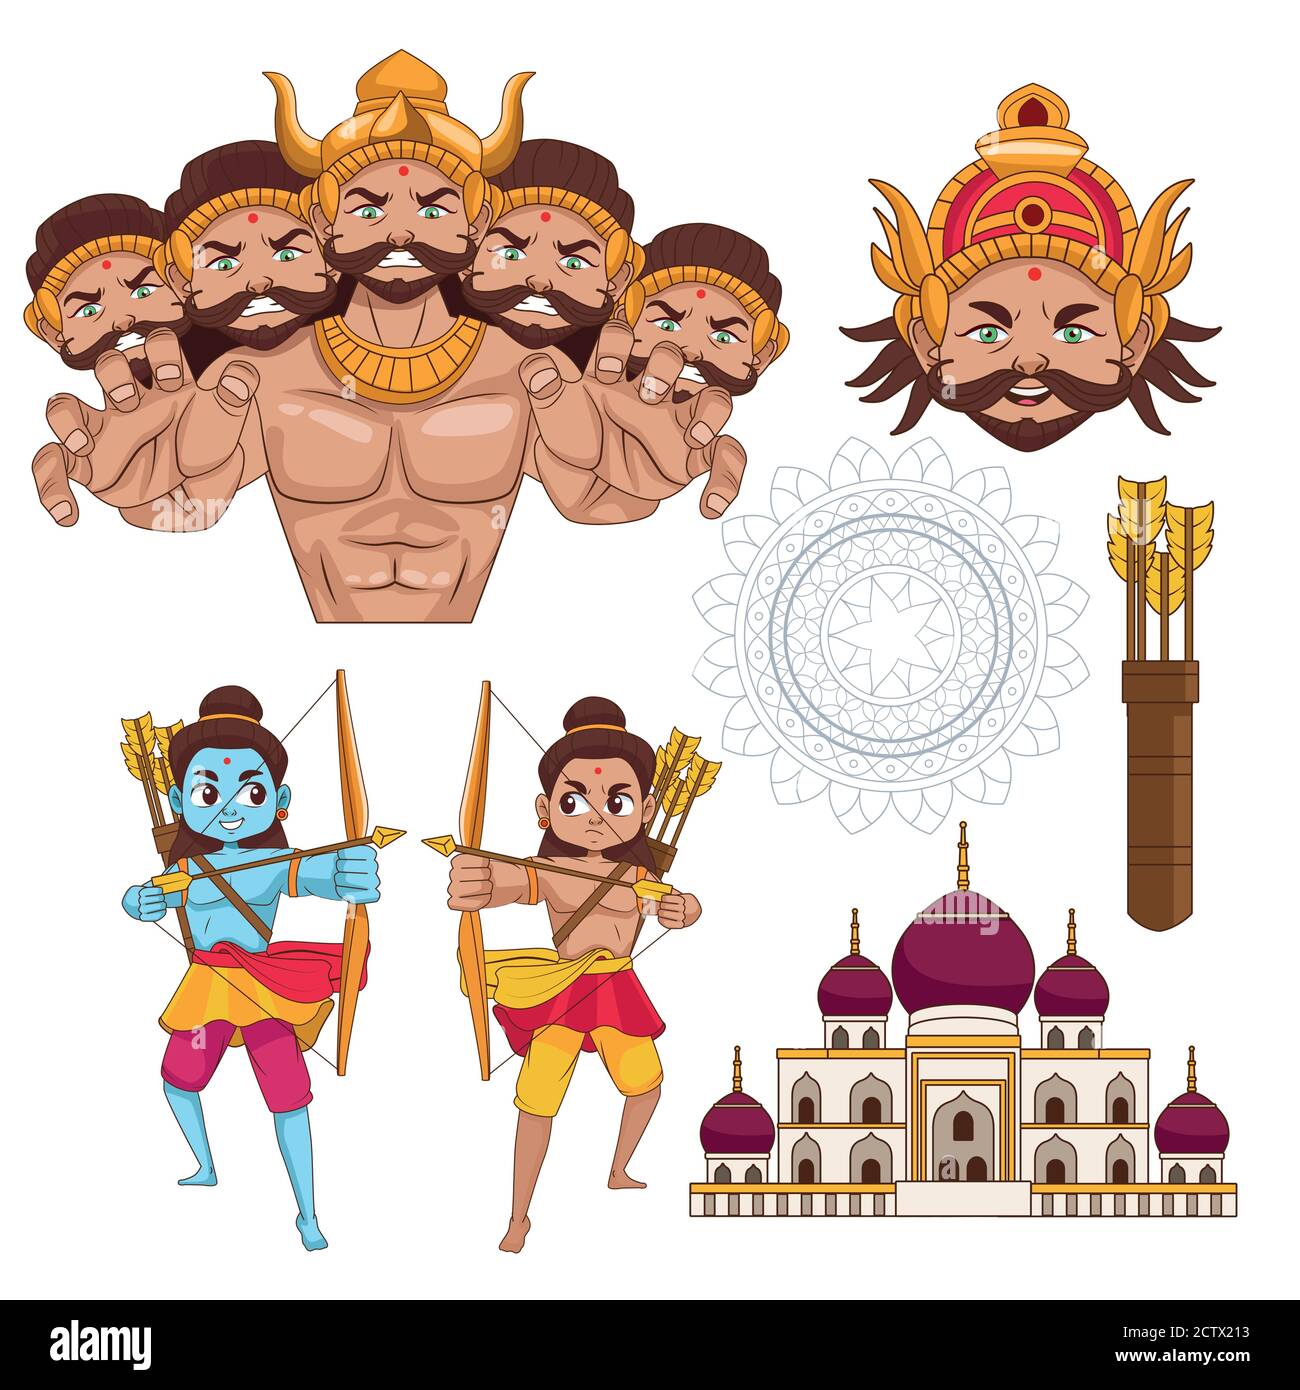 Happy dussehra Cut Out Stock Images & Pictures - Alamy